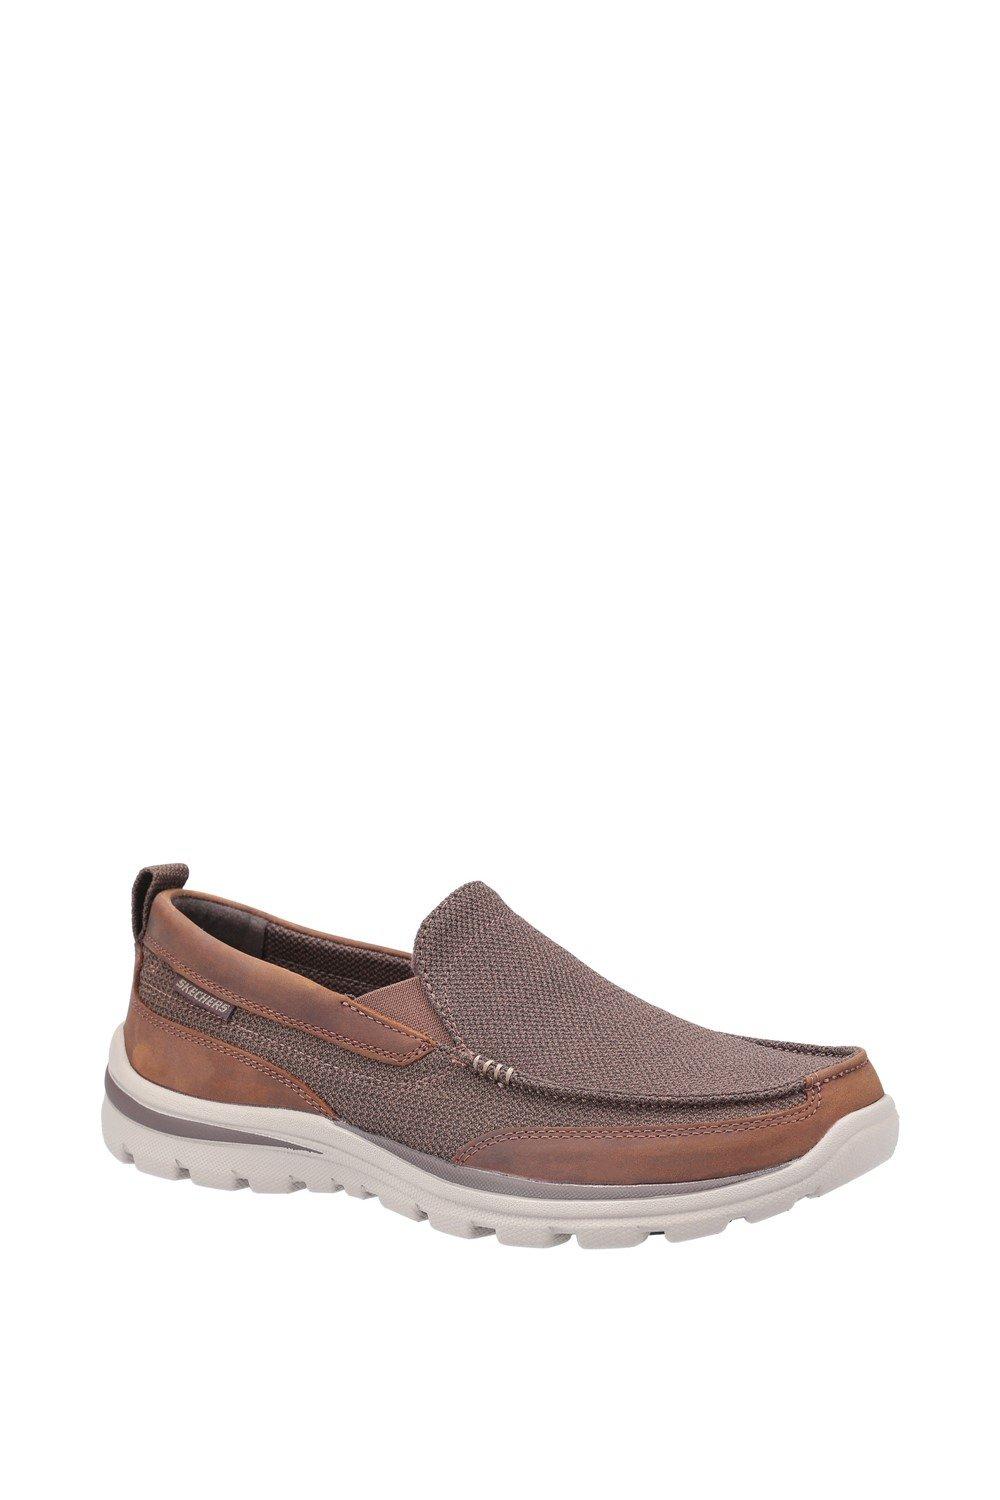 Shoes | 'Superior Milford' Slip On Shoes | Skechers